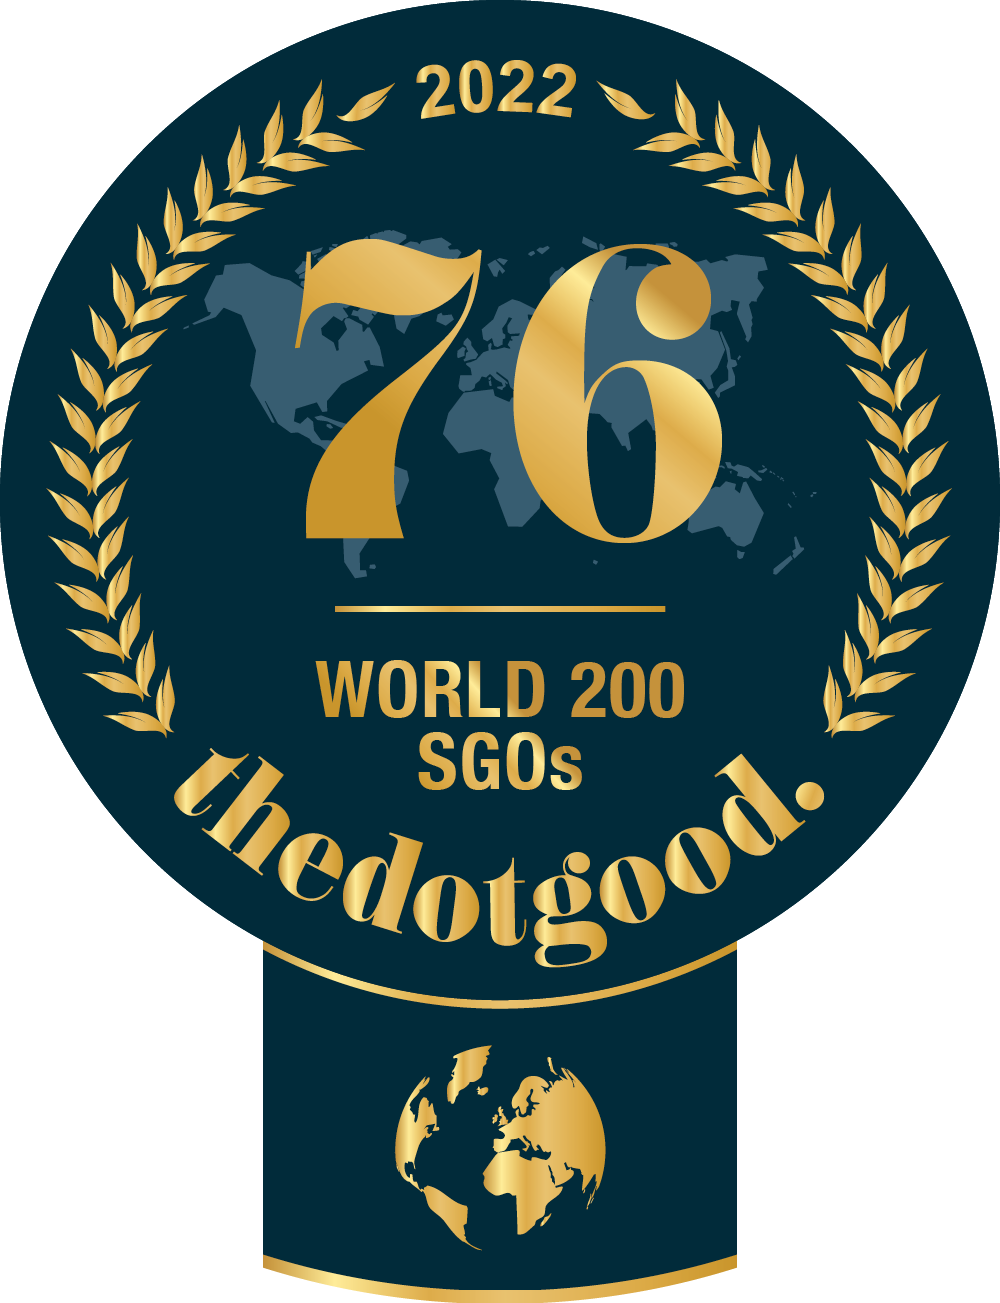 CITIZEN LEADER LAB is world ranked on thedotgood.